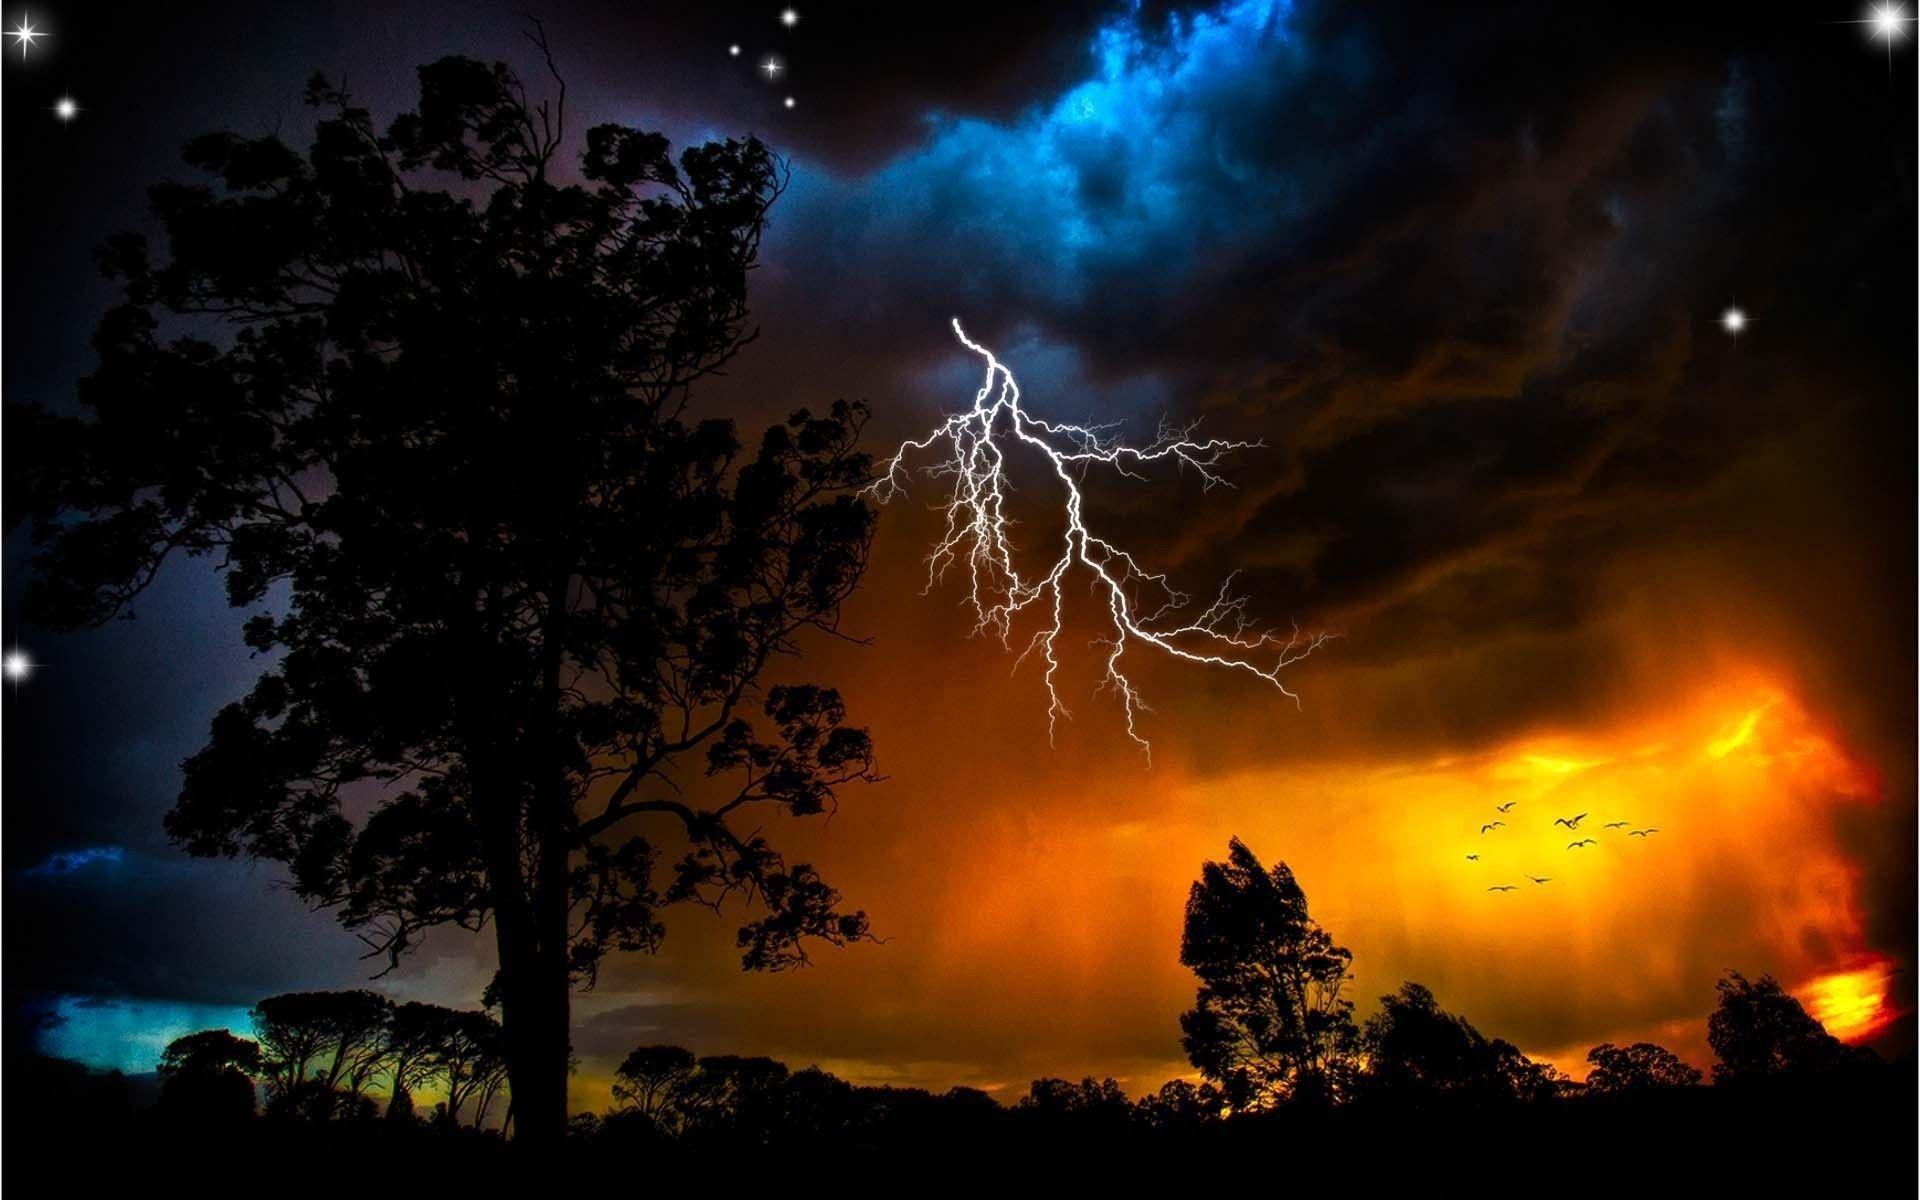 Thunderstorm Photos Download The BEST Free Thunderstorm Stock Photos  HD  Images